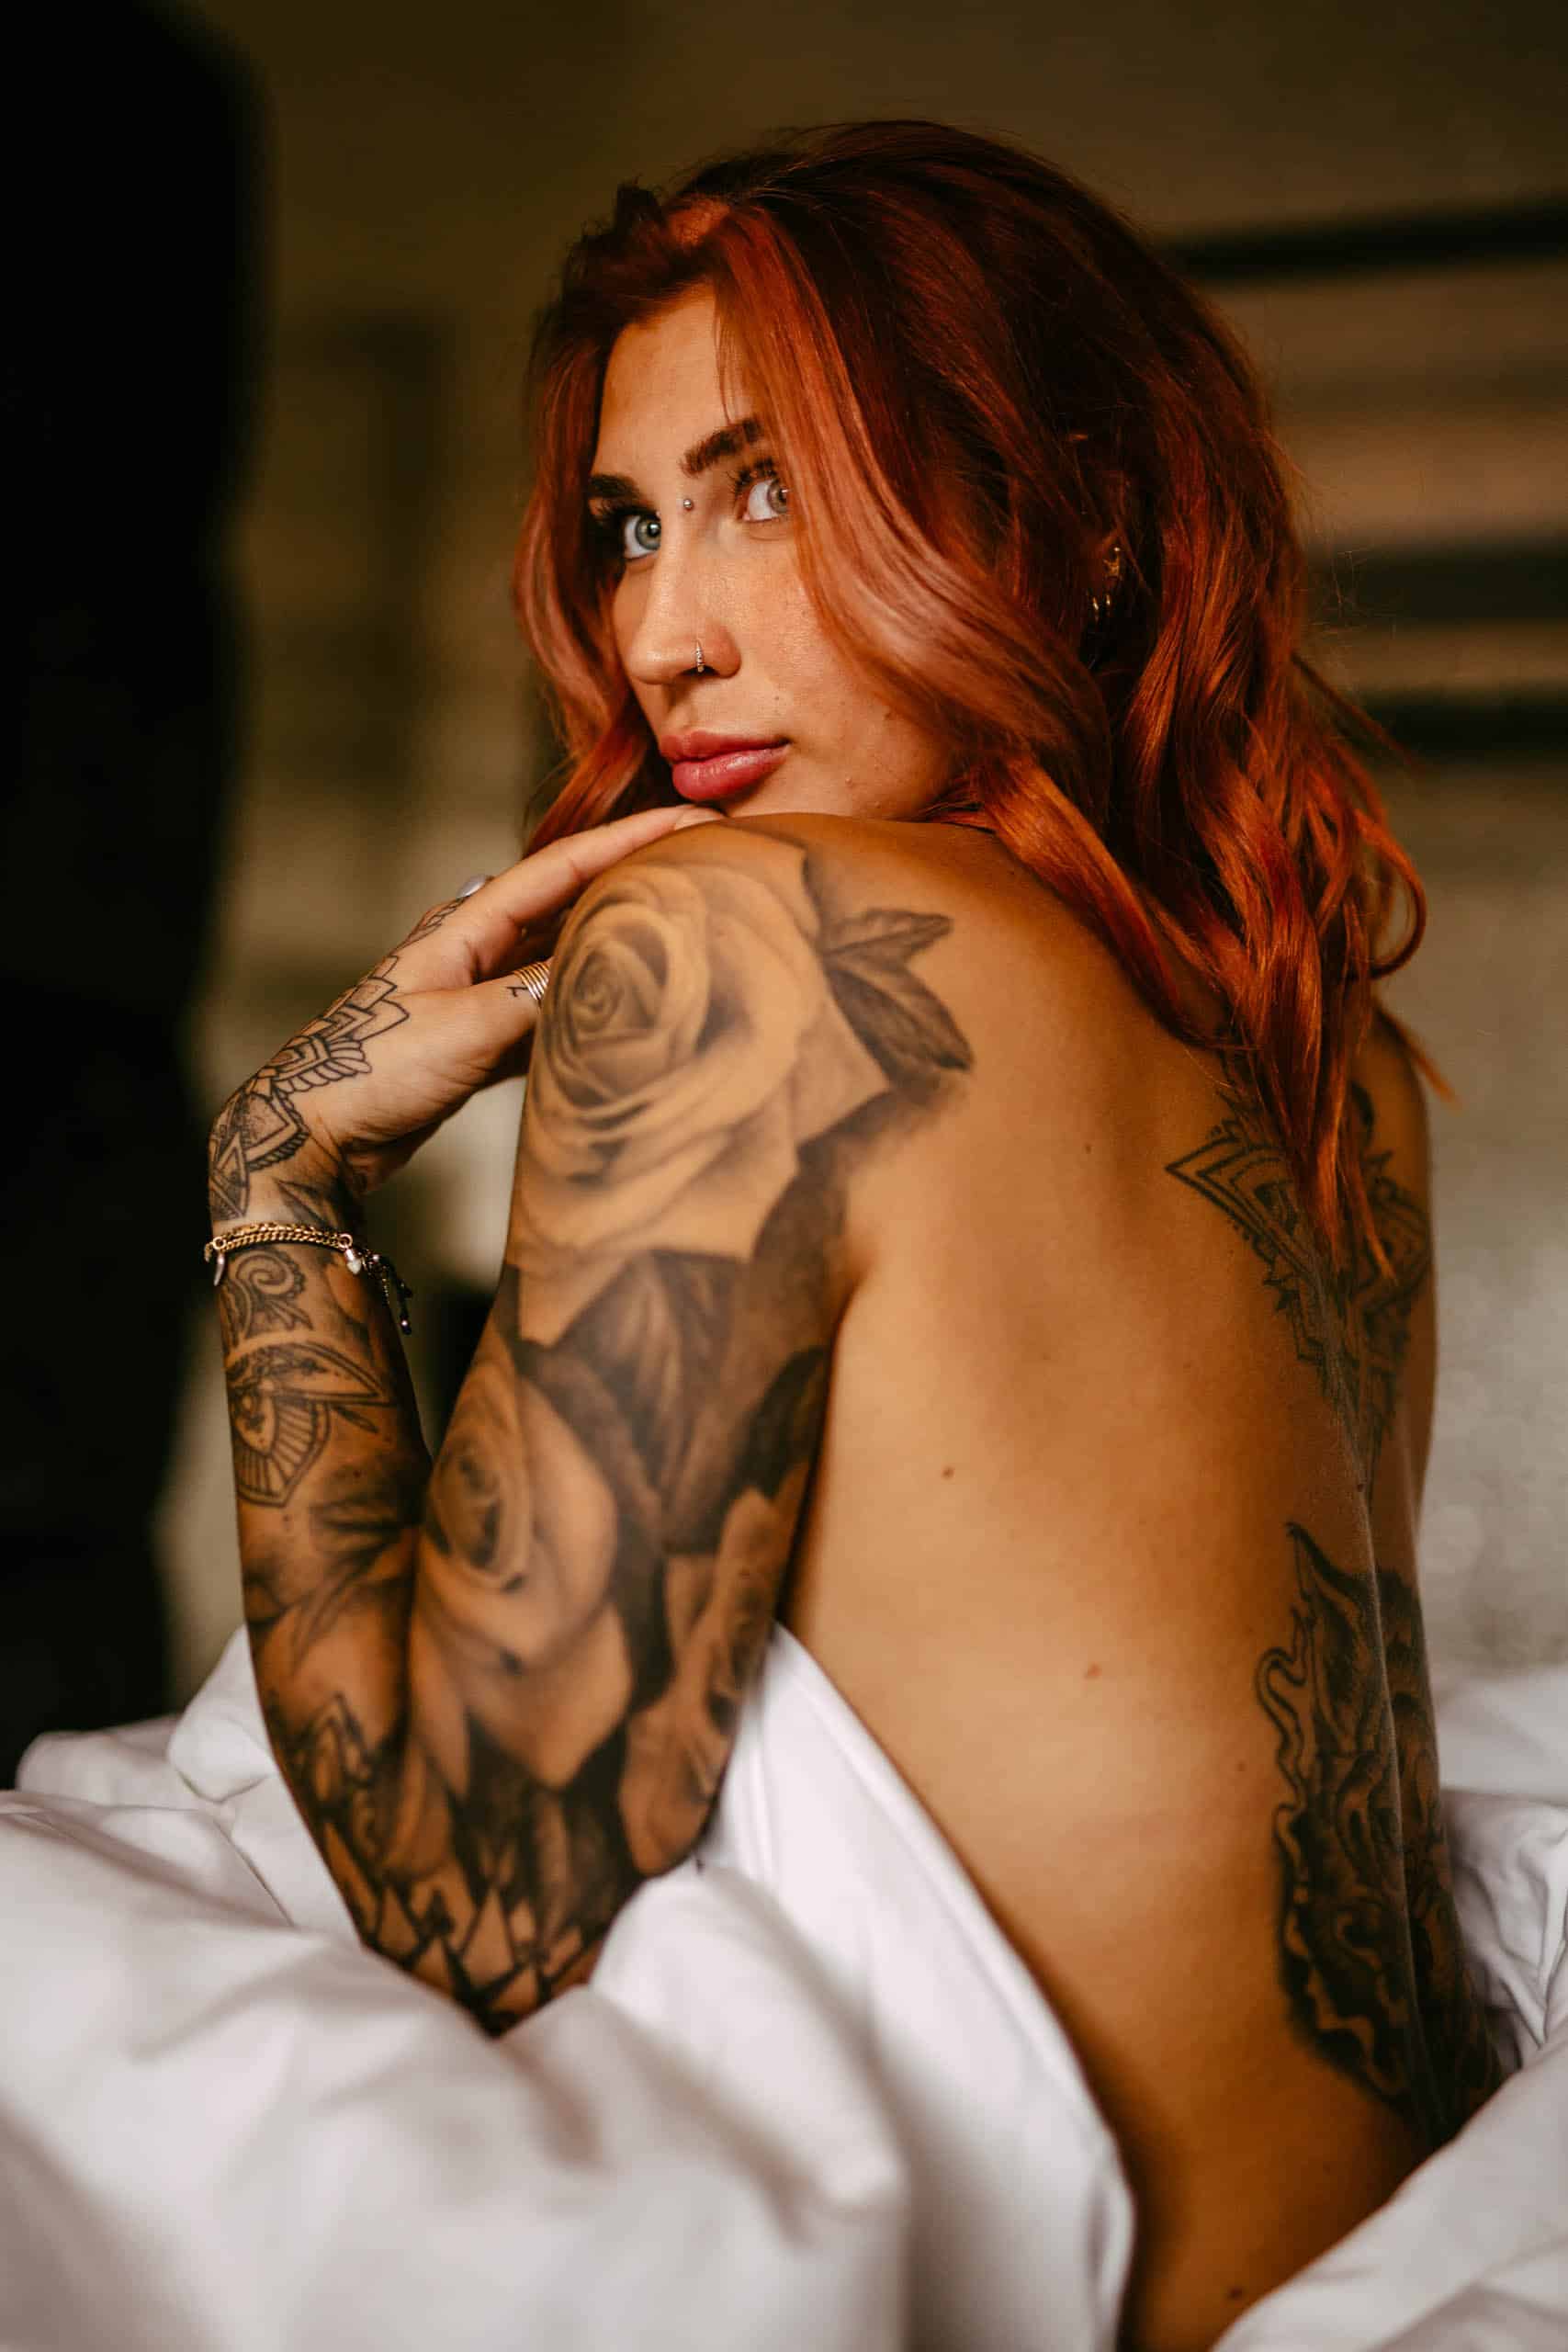 A woman with red hair and tattoos poses for a boudoir shoot in bed in Hoek van Holland.